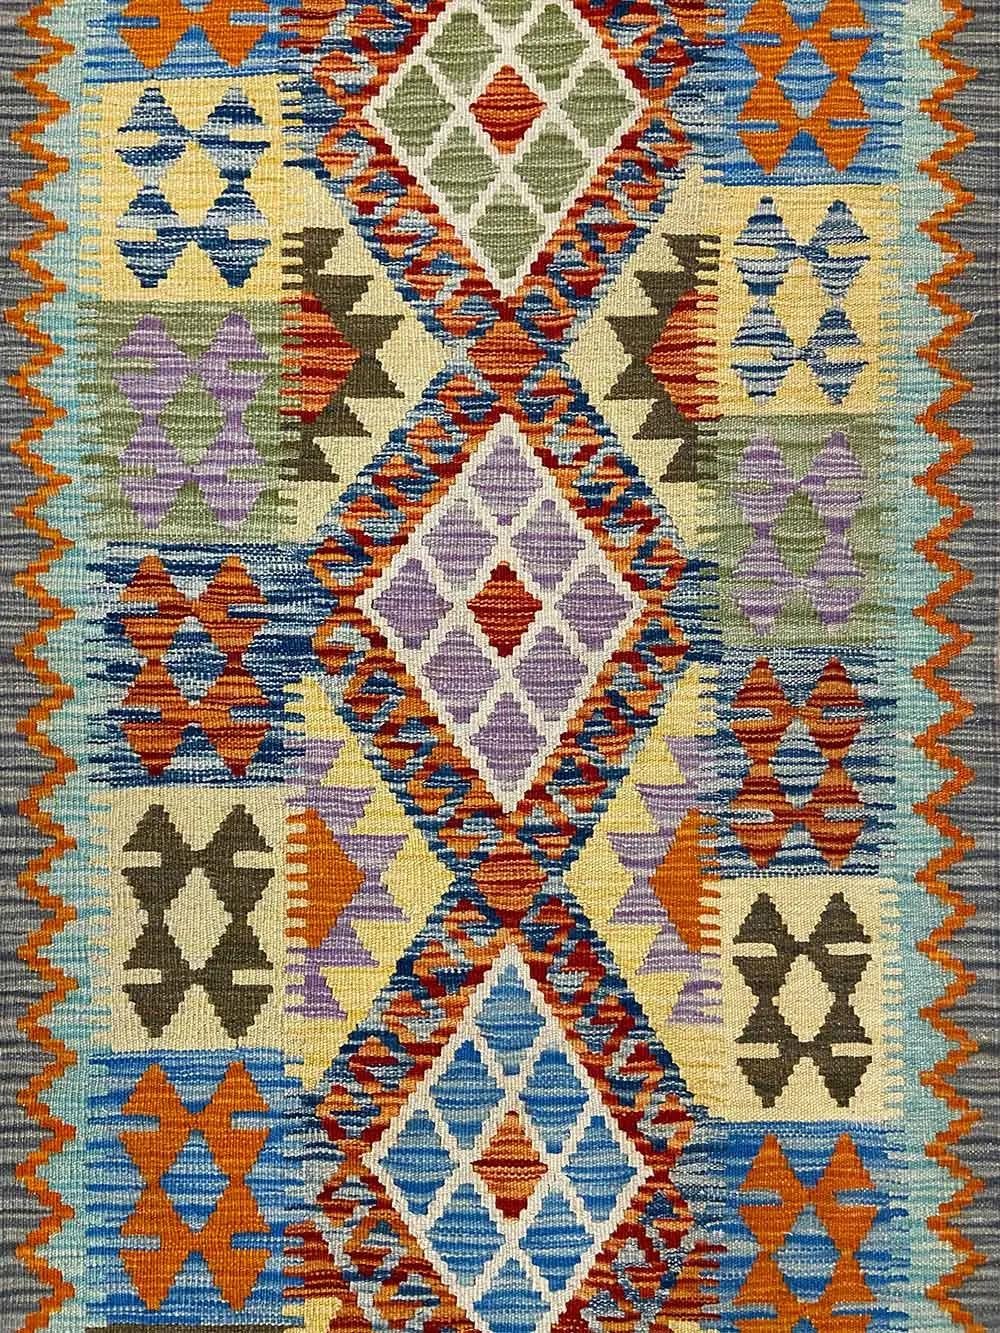 Fantastic quality, reversible, all wool with vegetable dyes.

Kilim, a word of Turkish origin, denotes a textile of many uses produced by one of several flatweaving techniques. They have a common or closely related heritage in the areas of Turkey,